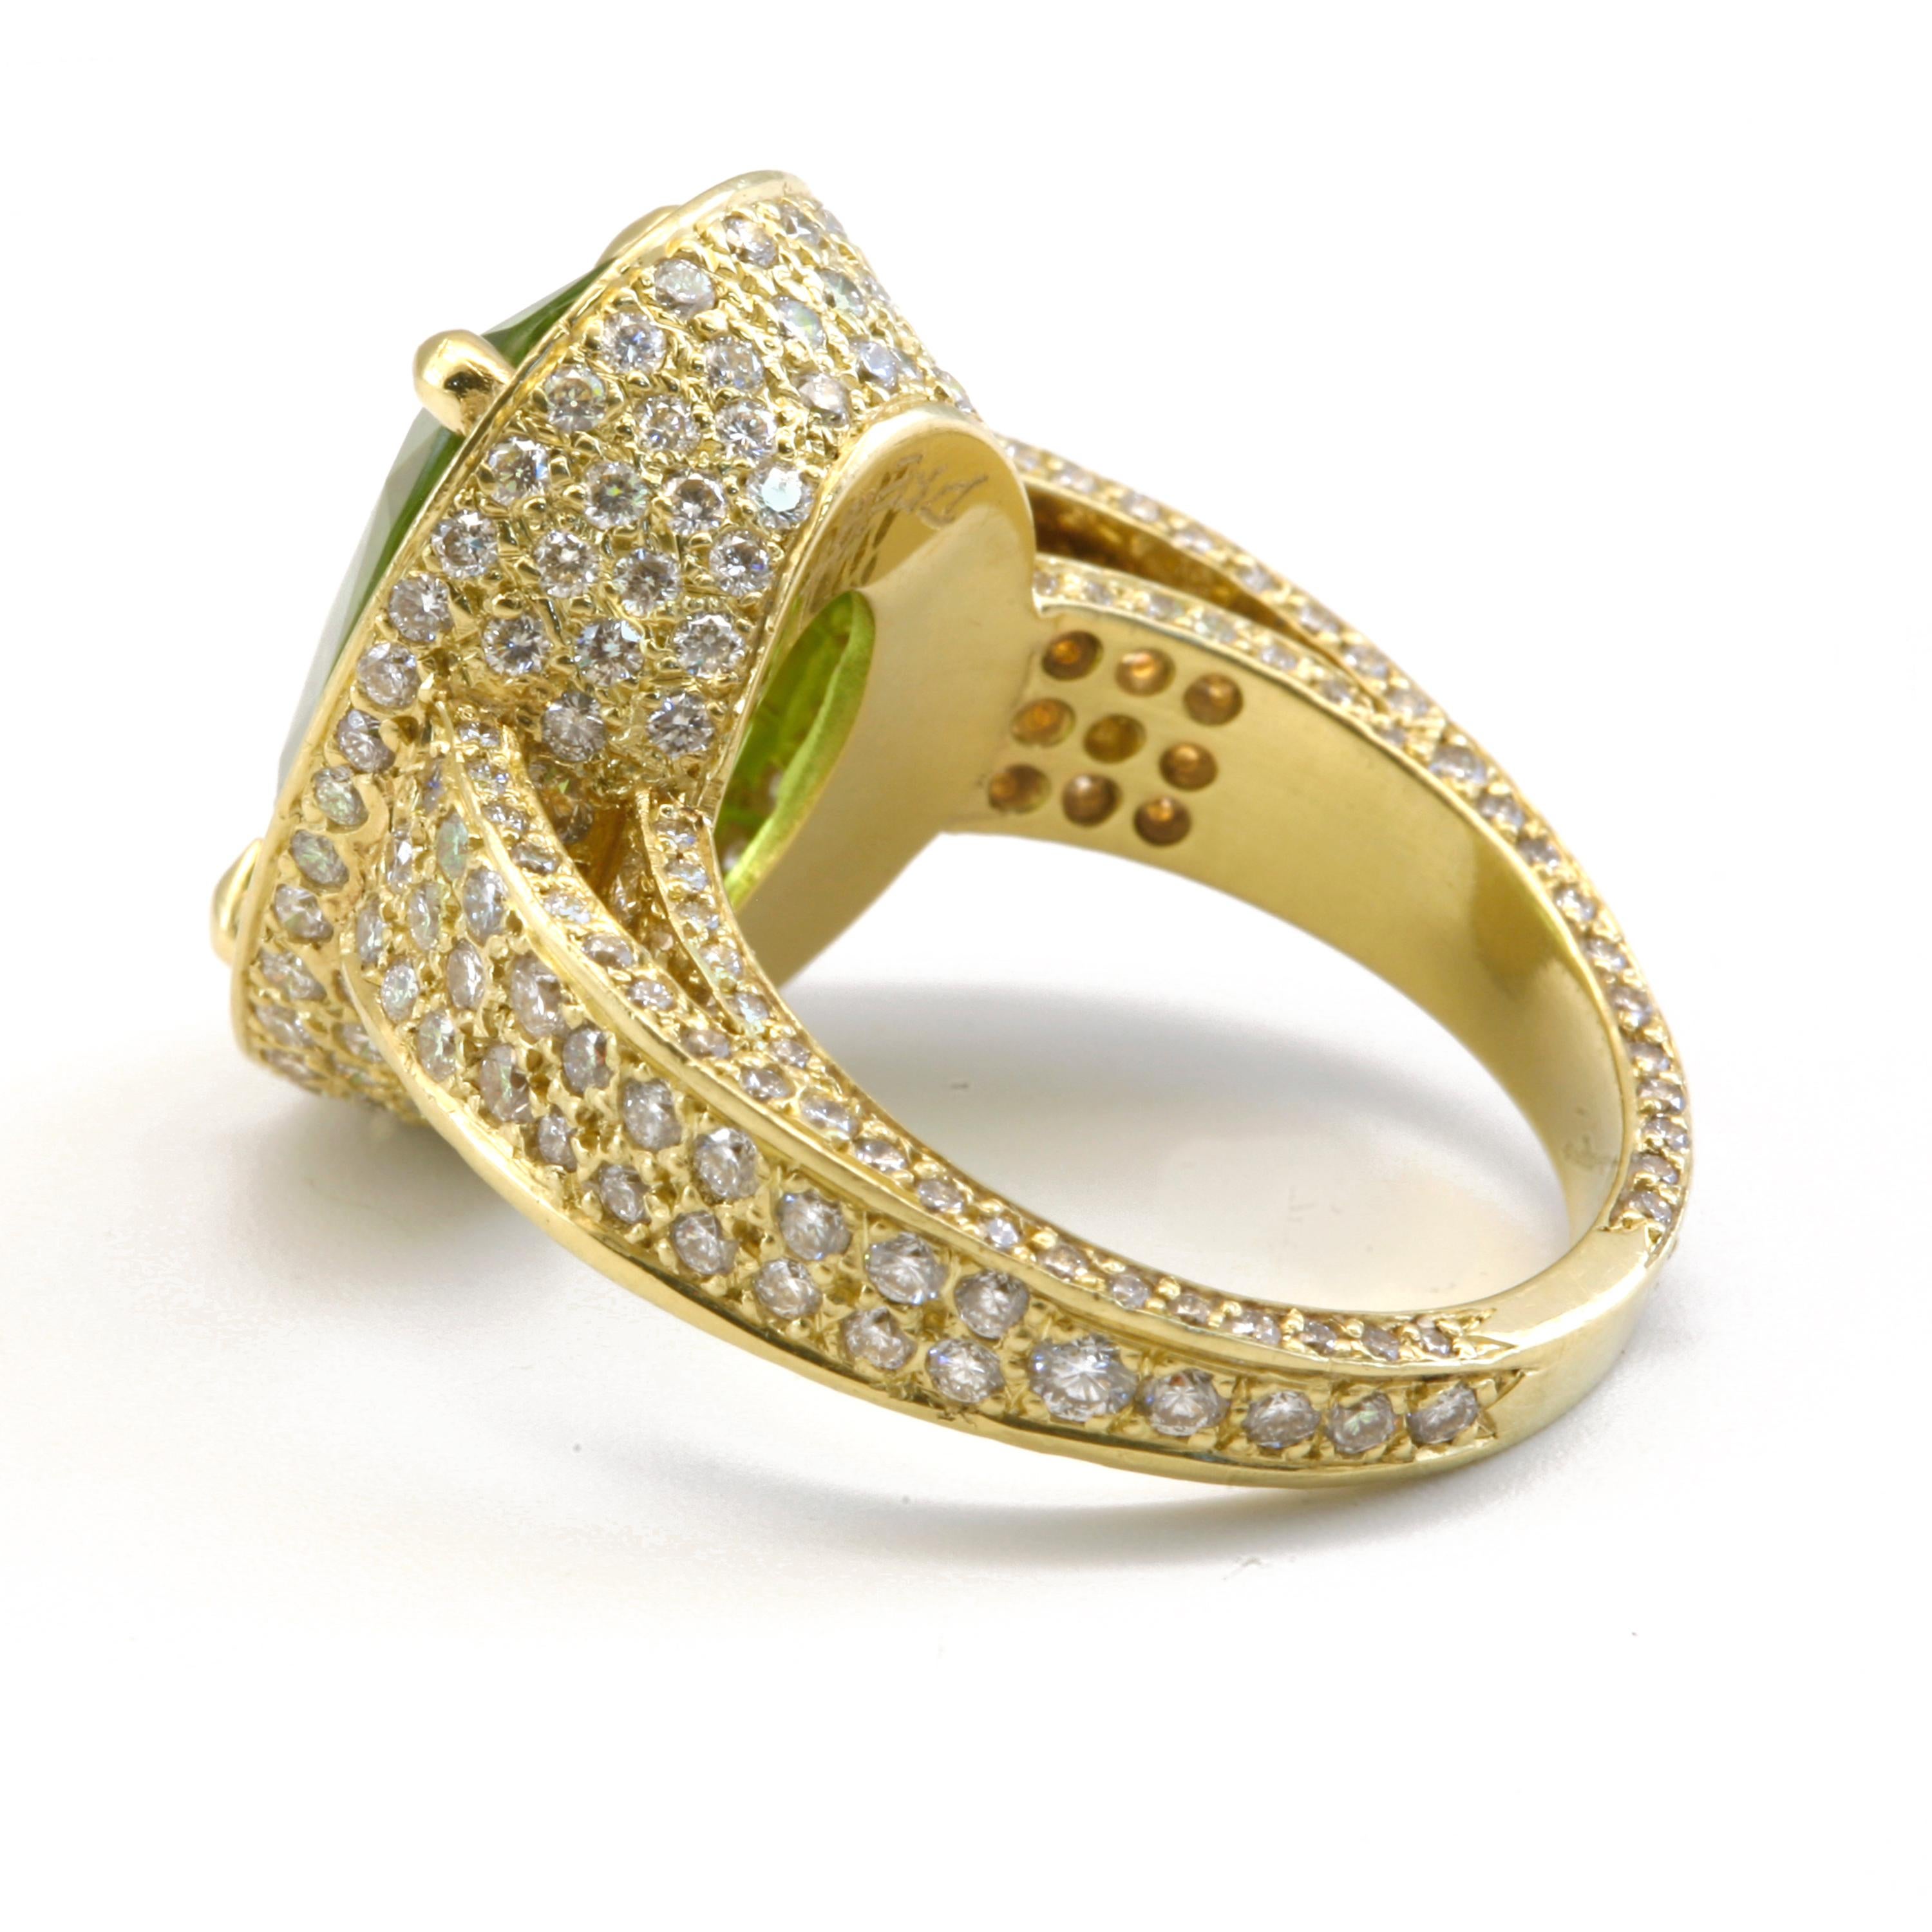 Oval Cut Diana Kim England Burmese Peridot Ring with Micro Pave Diamonds Set in 18k Gold For Sale